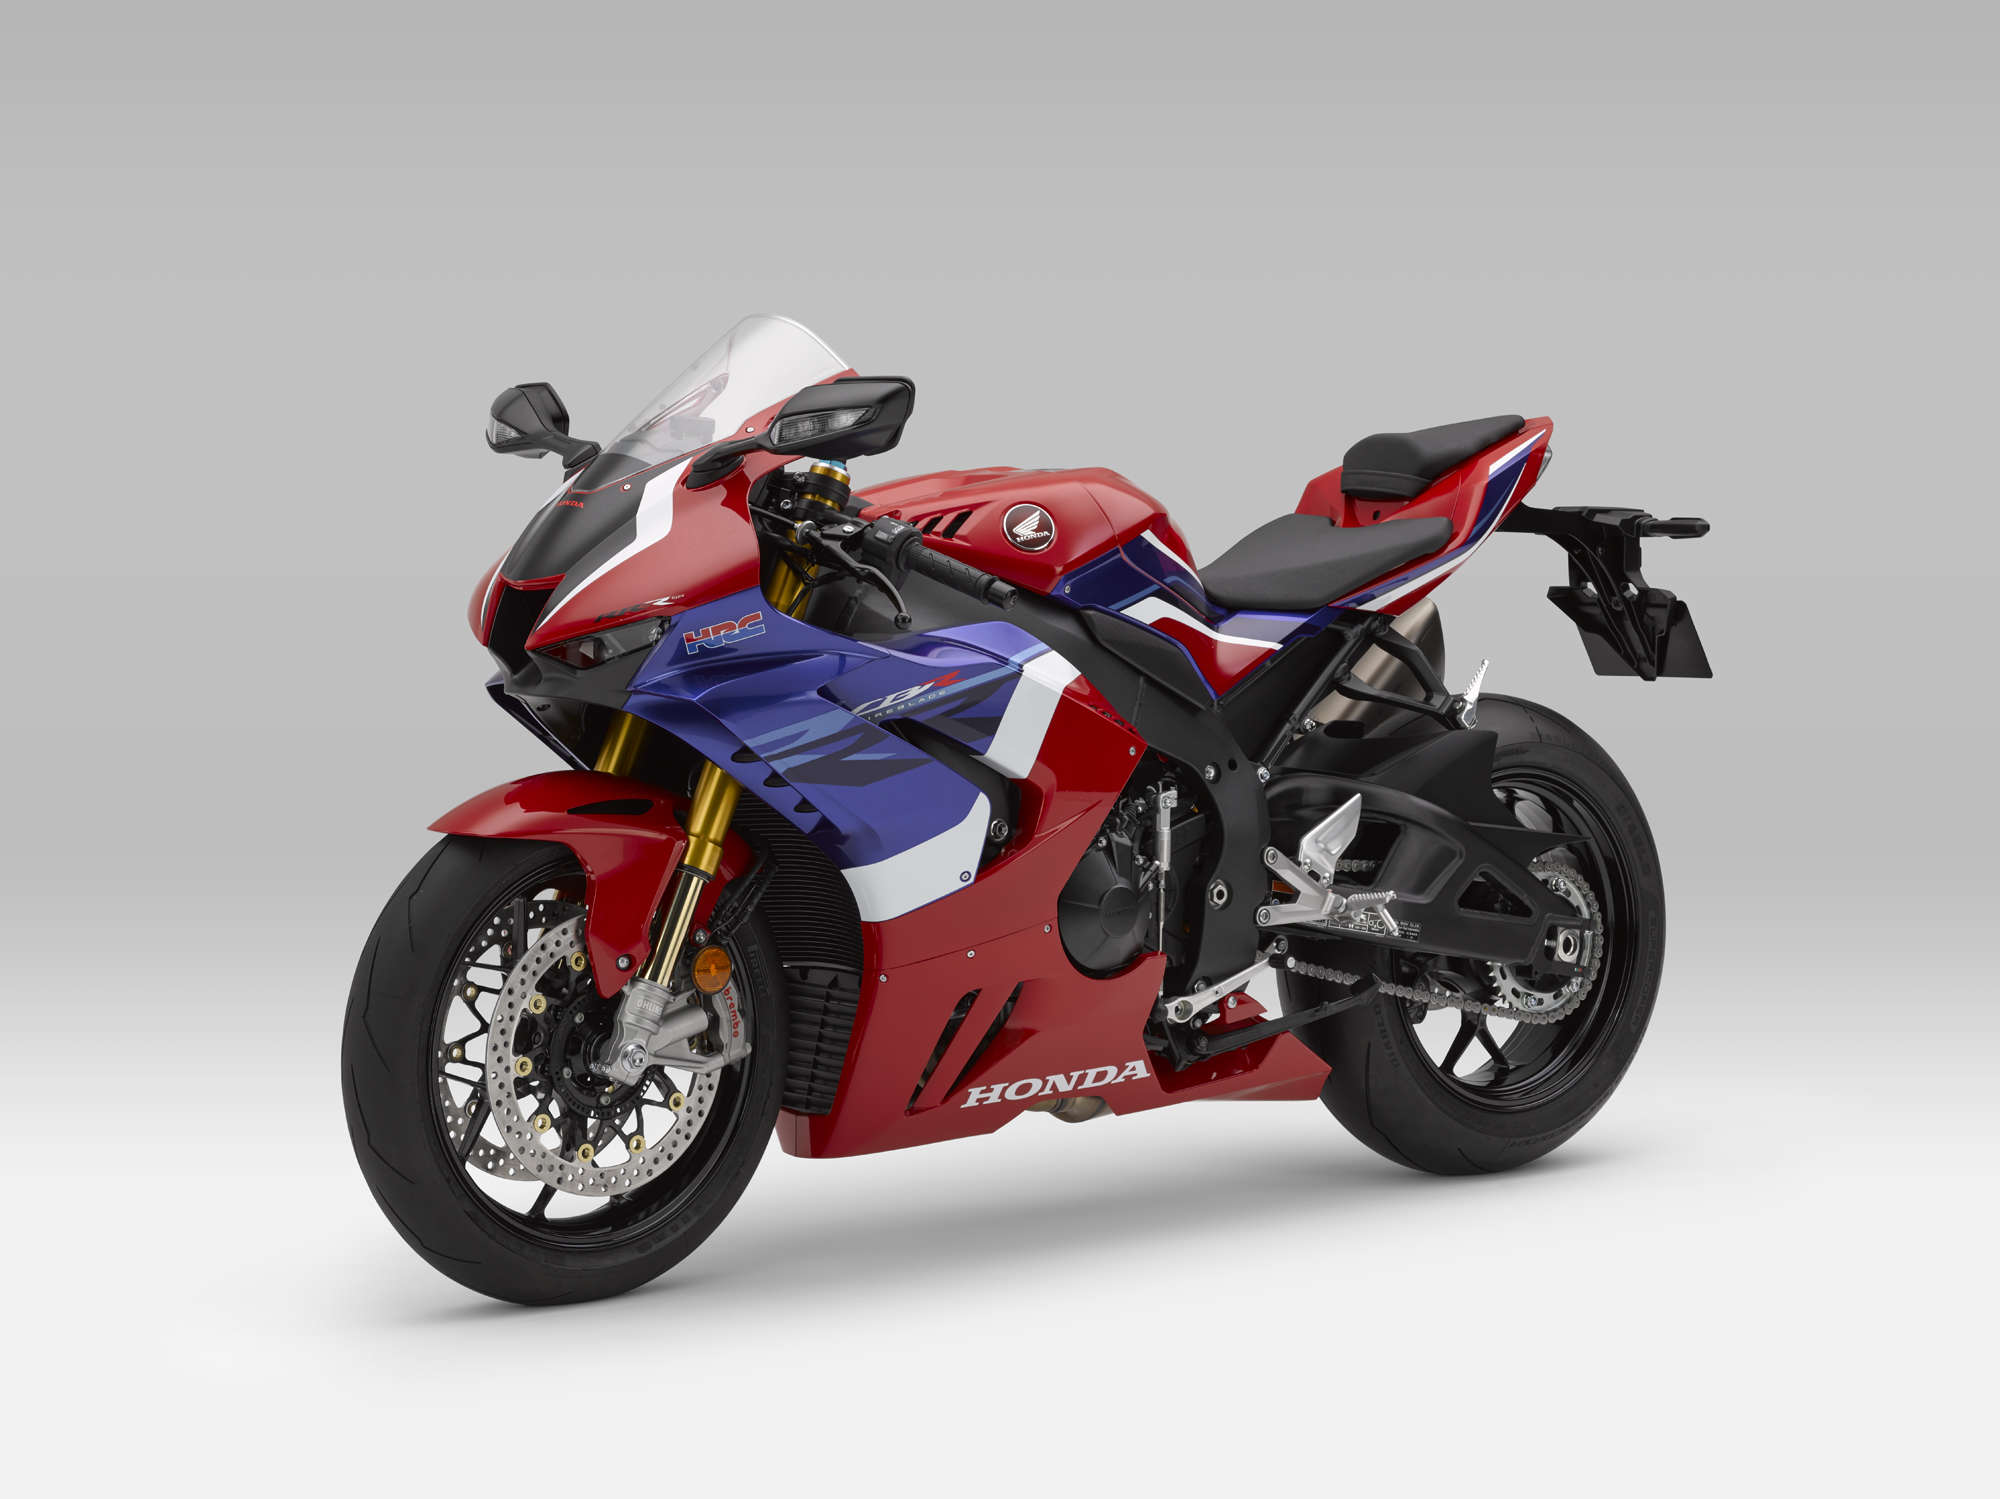 The new Honda Fireblade range comes with upgrades like throttle-by-wire (TBW), Honda Selectable Torque Control (HSTC), Honda Electronic Steering Damper (HESD).